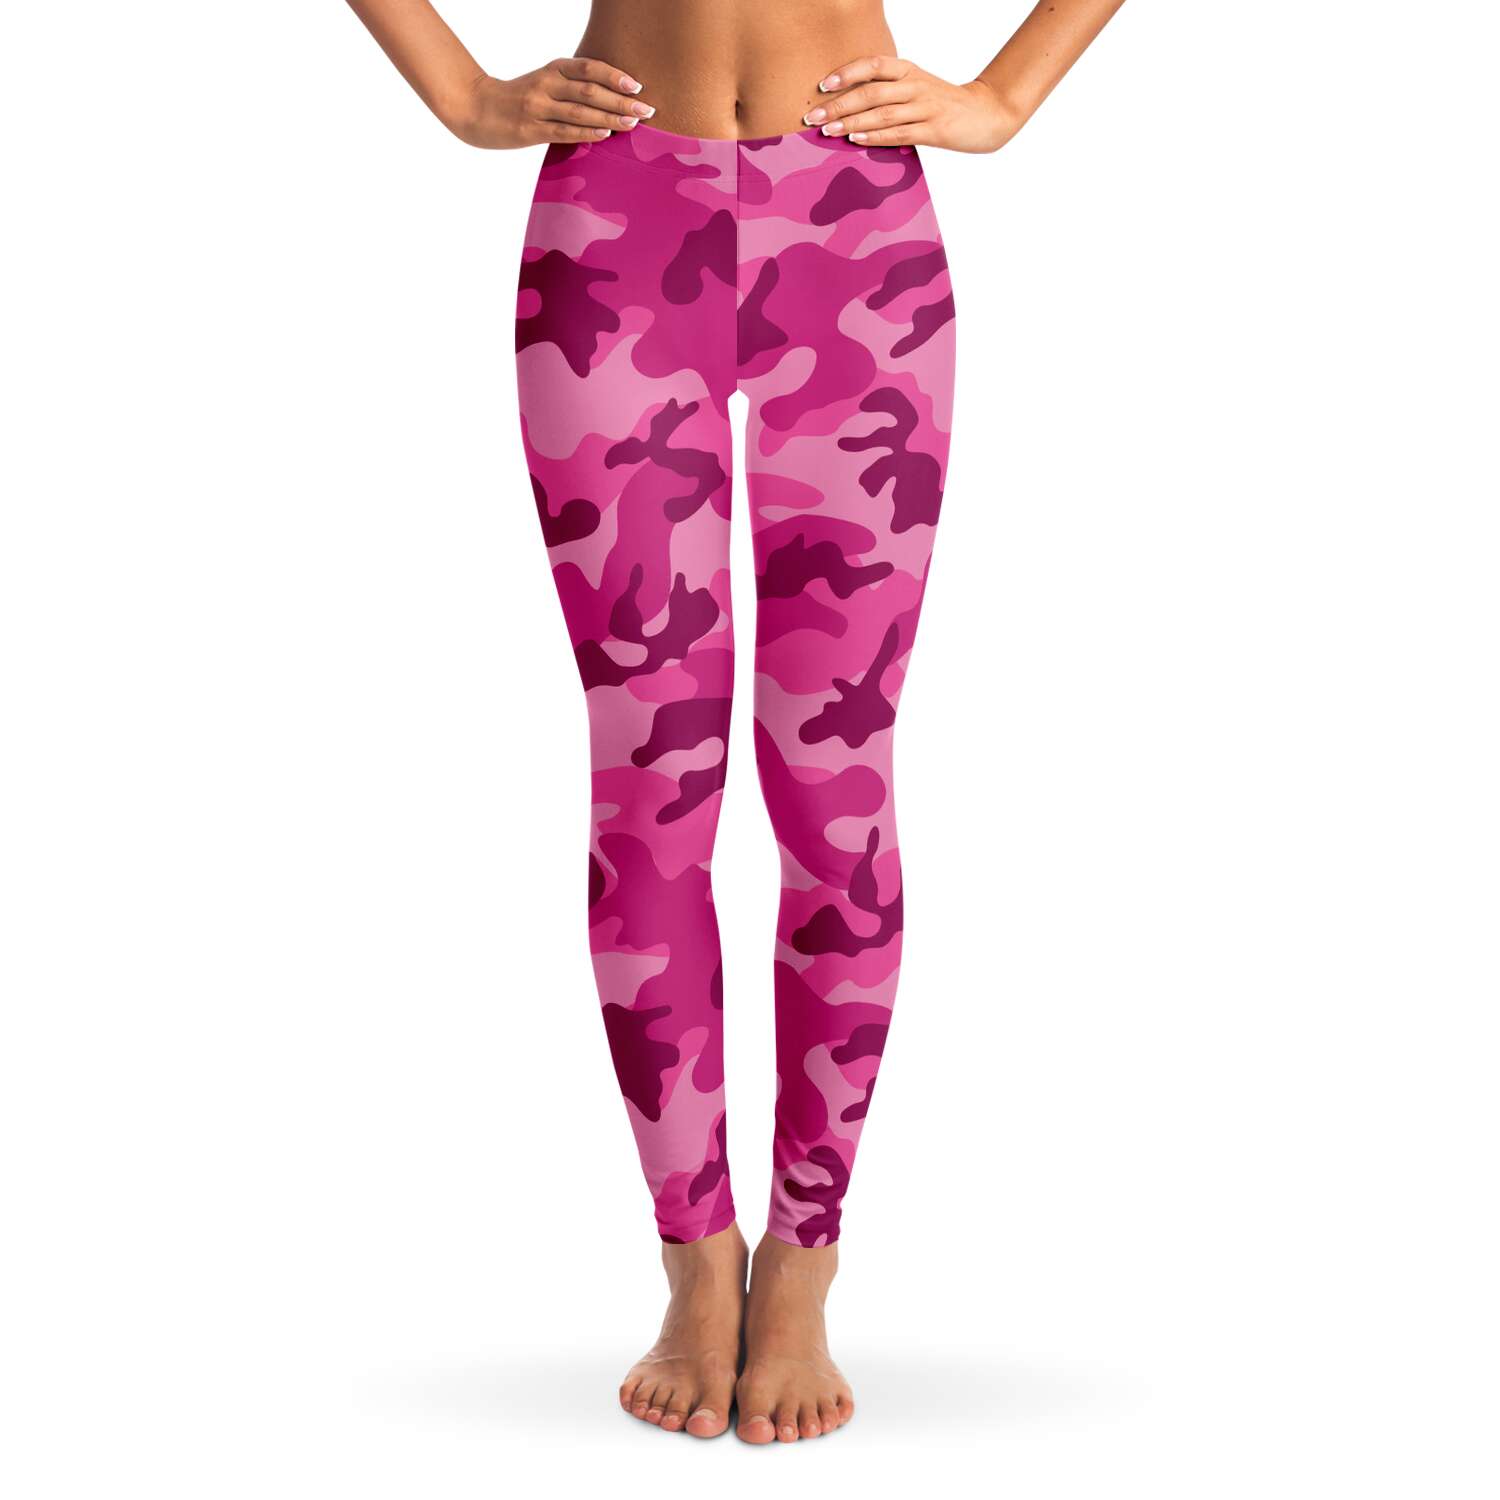 Women's All Pink Camouflage Mid-rise Yoga Leggings